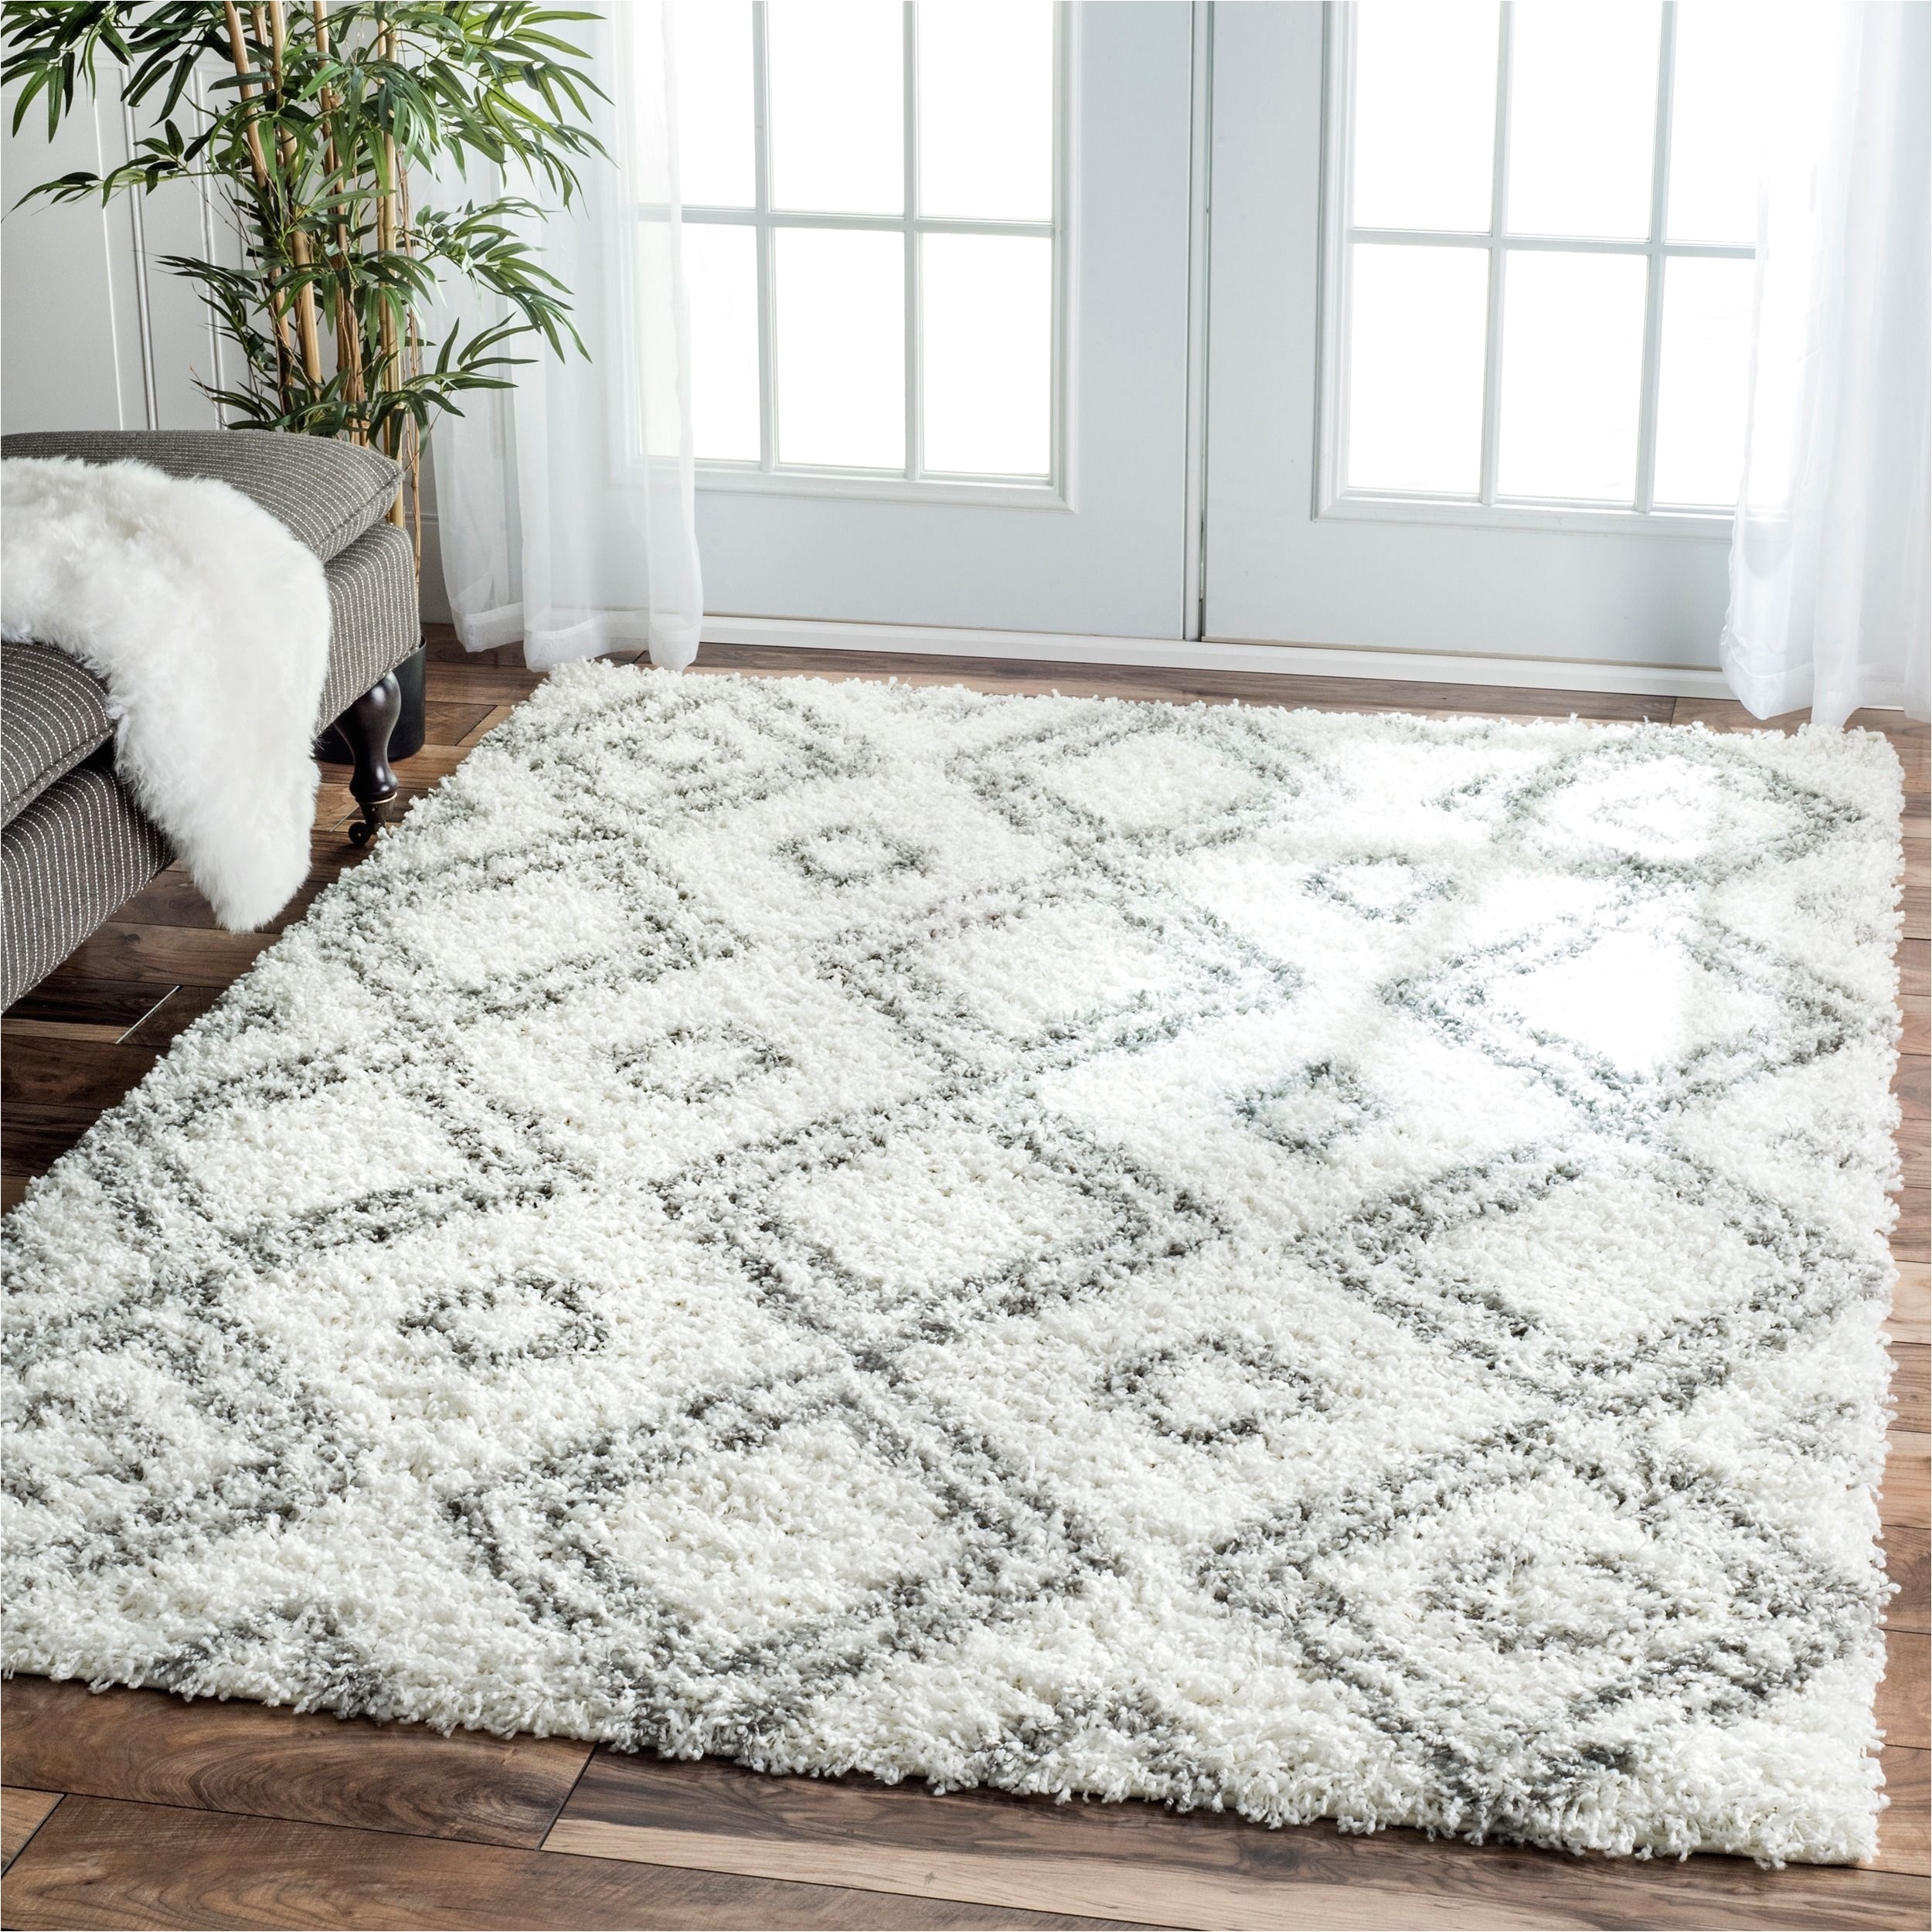 Navy Blue Furry Rug Inspired by Moroccan Berber Carpets This Trellis Shag Rug Adds